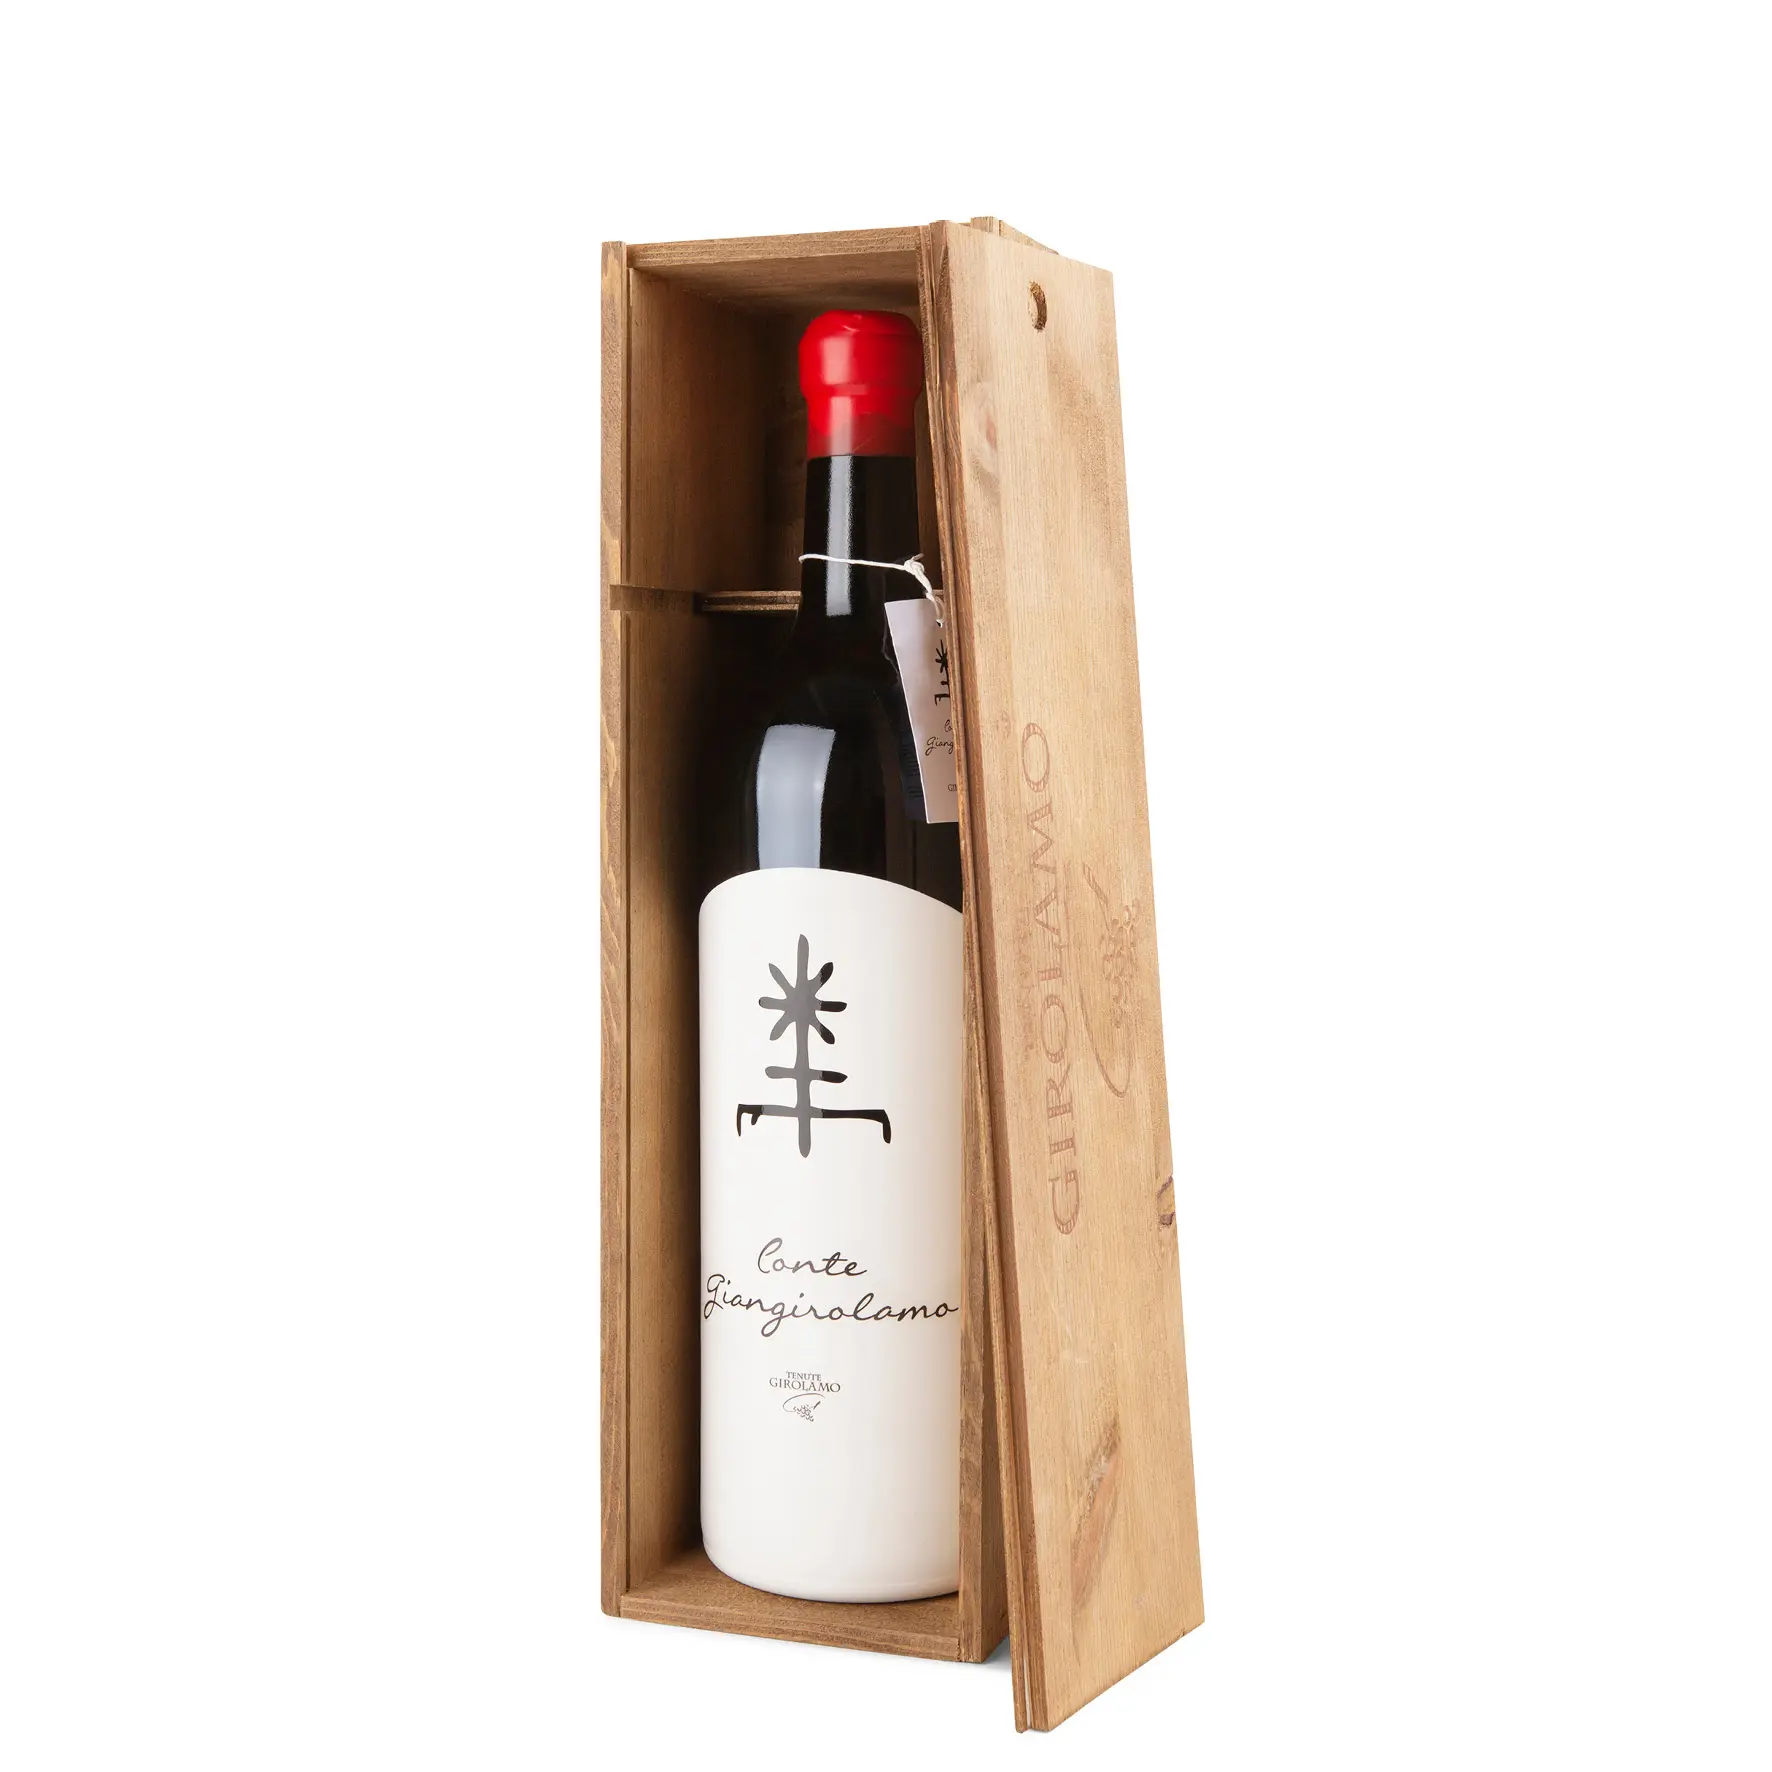 Well known Italian 3 l still red wine for luxury restaurant with hand-painted bottle